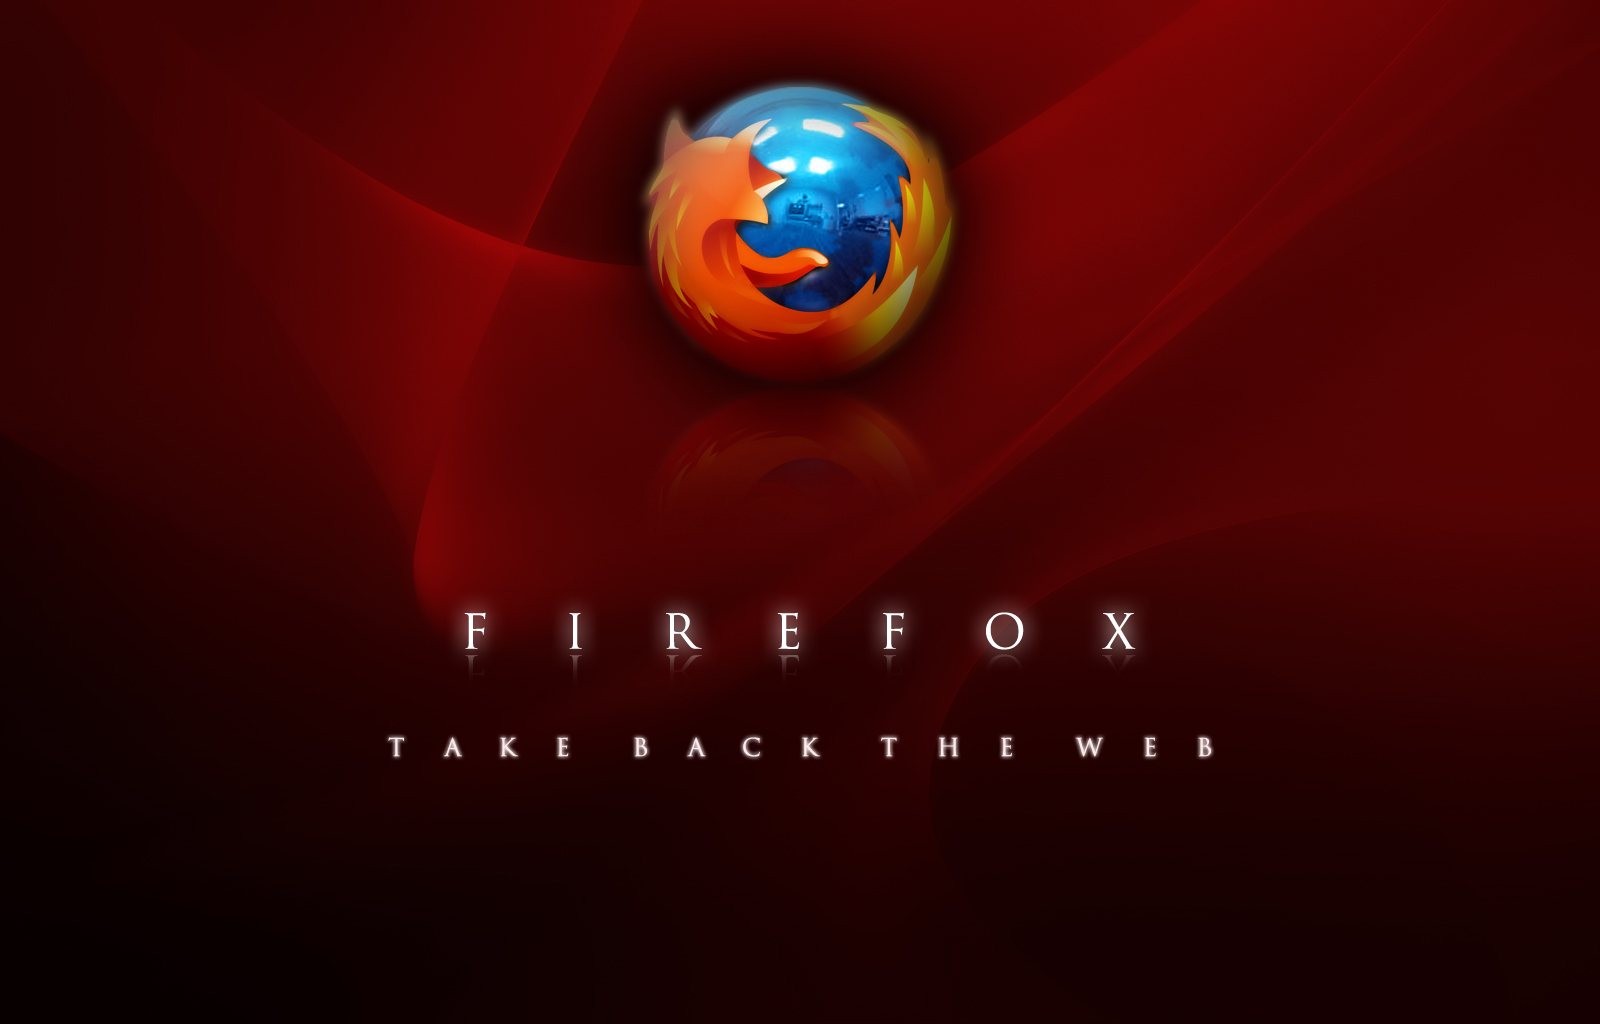 Firefox Wallpaper Set 7 Awesome Wallpapers